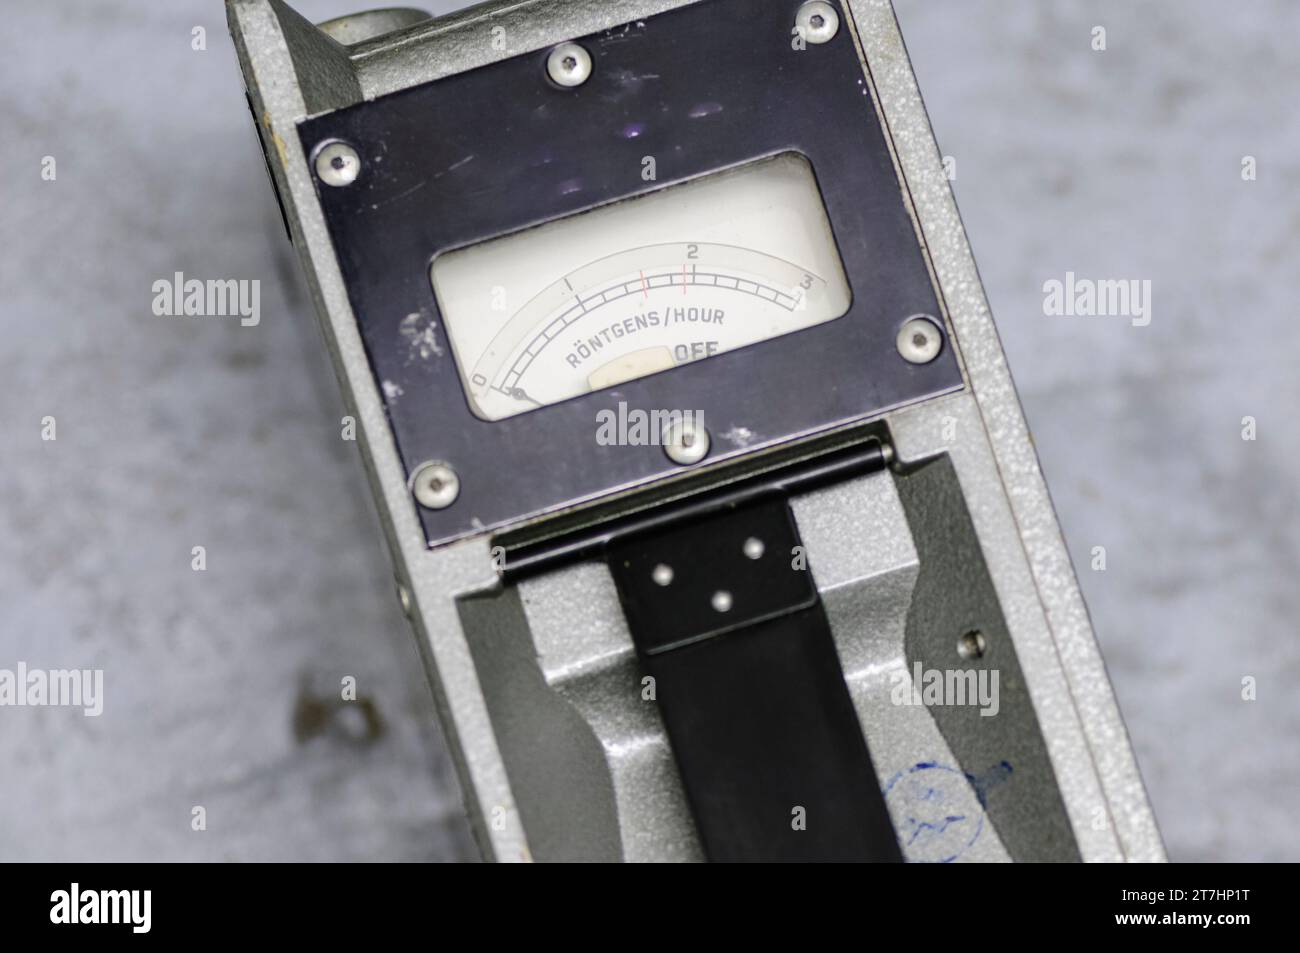 Military geiger counter showing a scale of 0 to 3 Rontgens per hour. Stock Photo